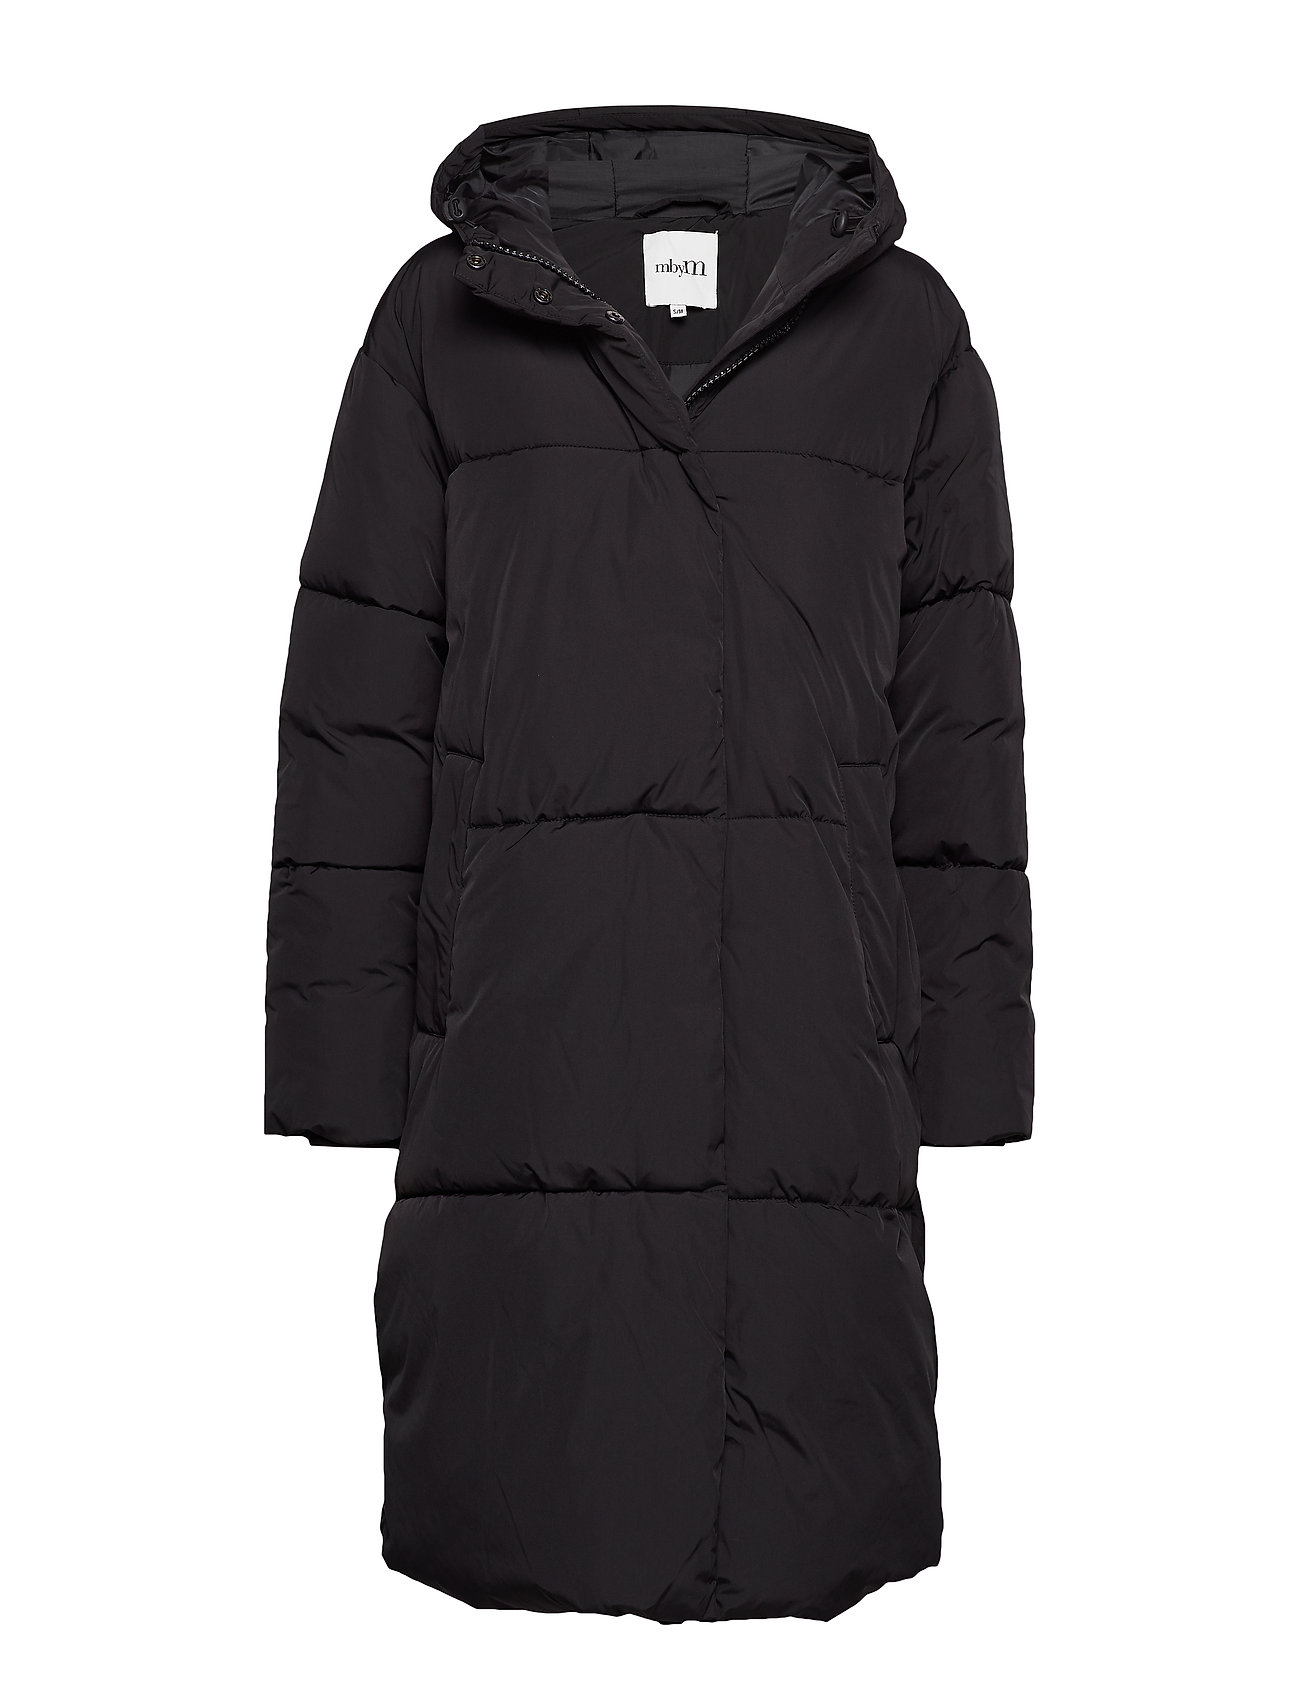 mbyM Merian - 99.98 €. Buy Padded Coats from mbyM online at Boozt.com ...